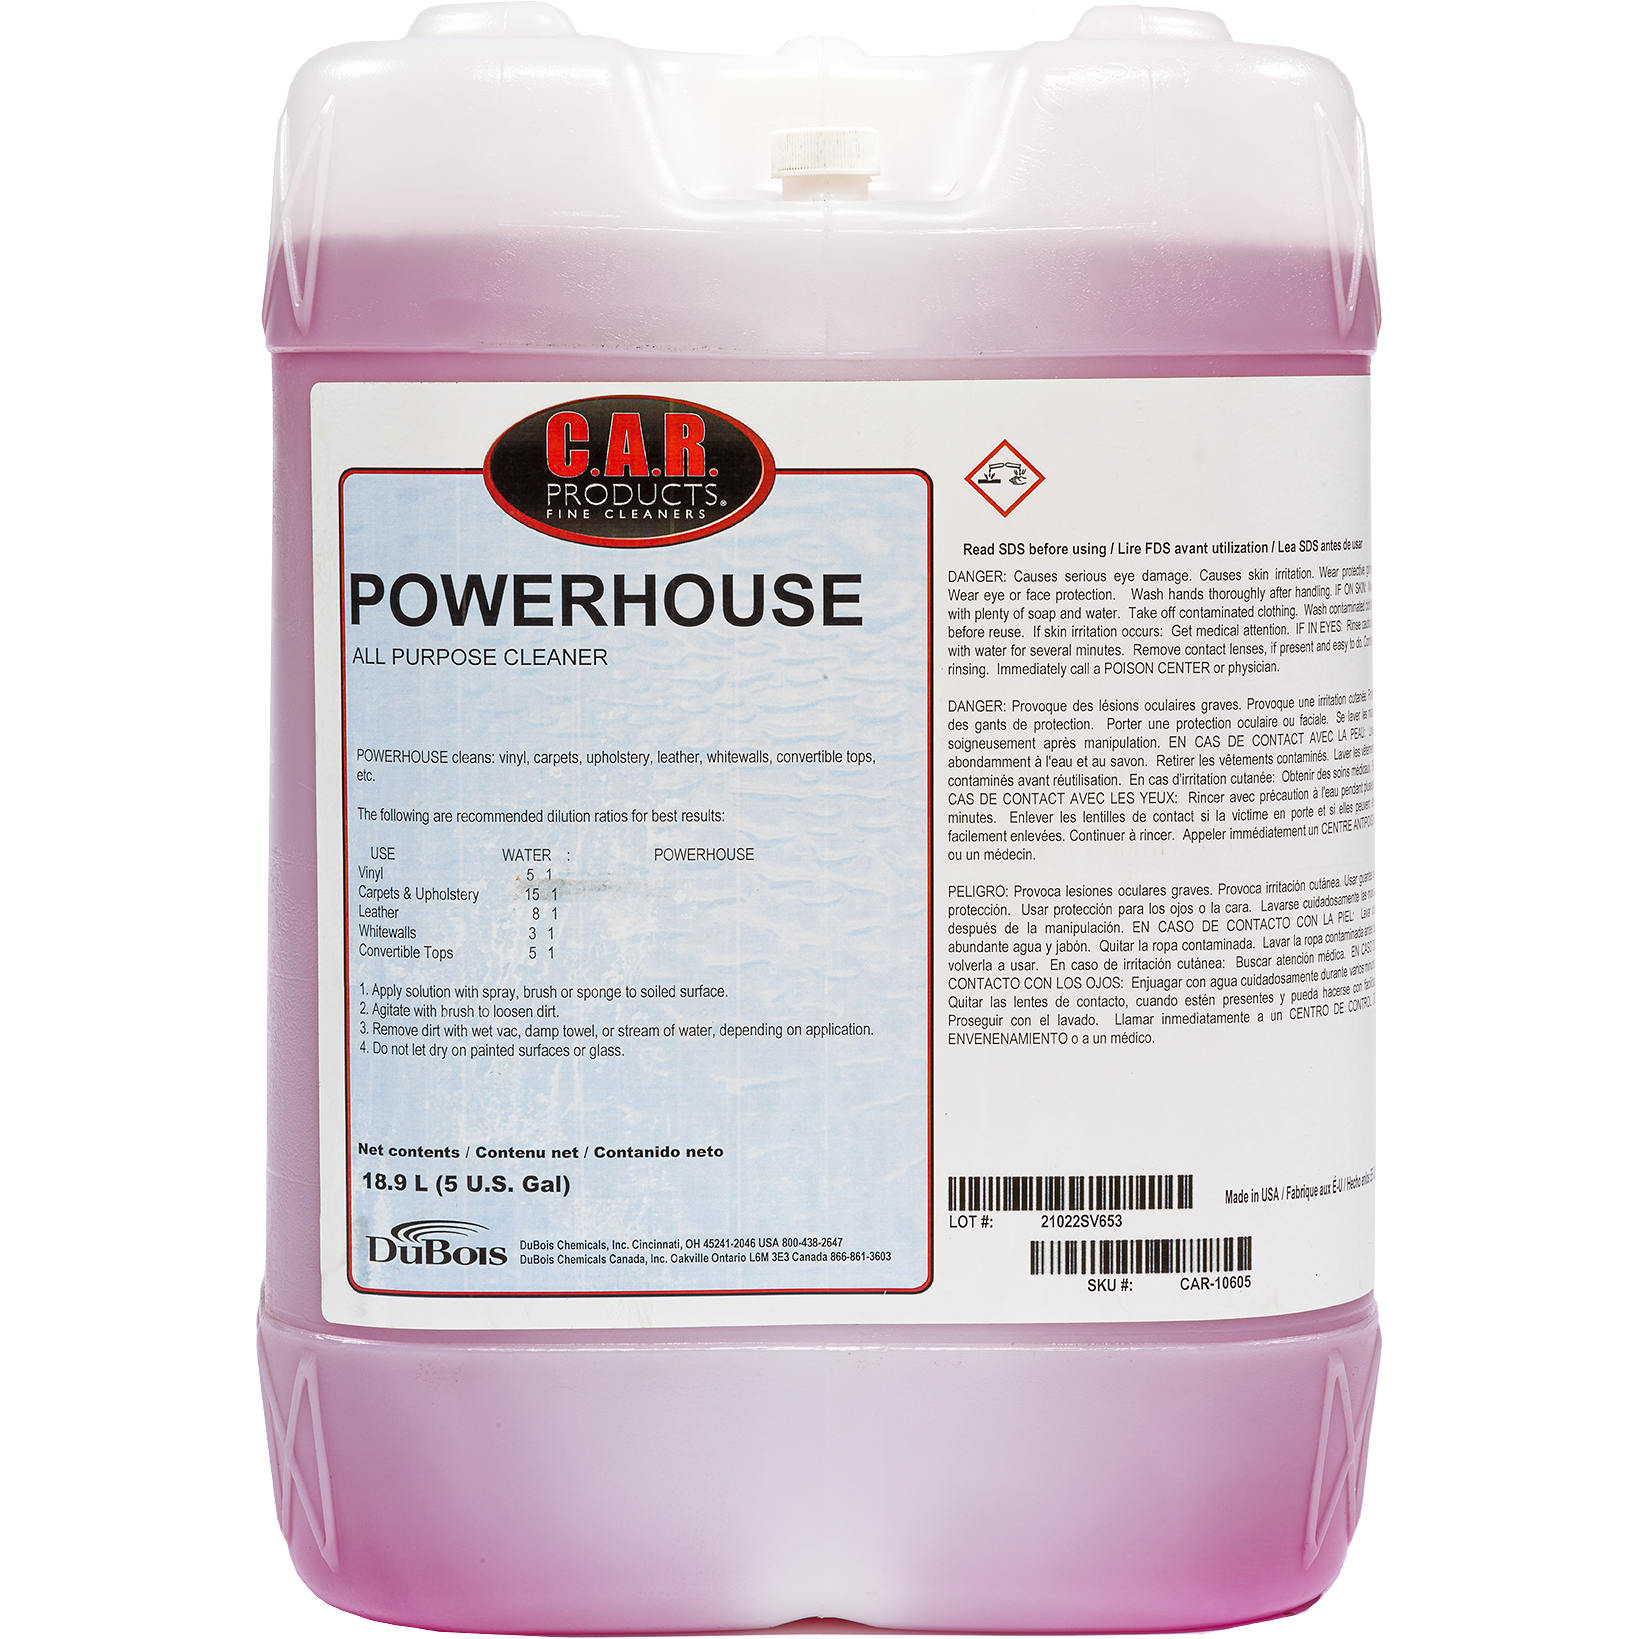 XCP CAR-10605 CAR Products Powerhouse All Purpose Cleaner (5 gal)